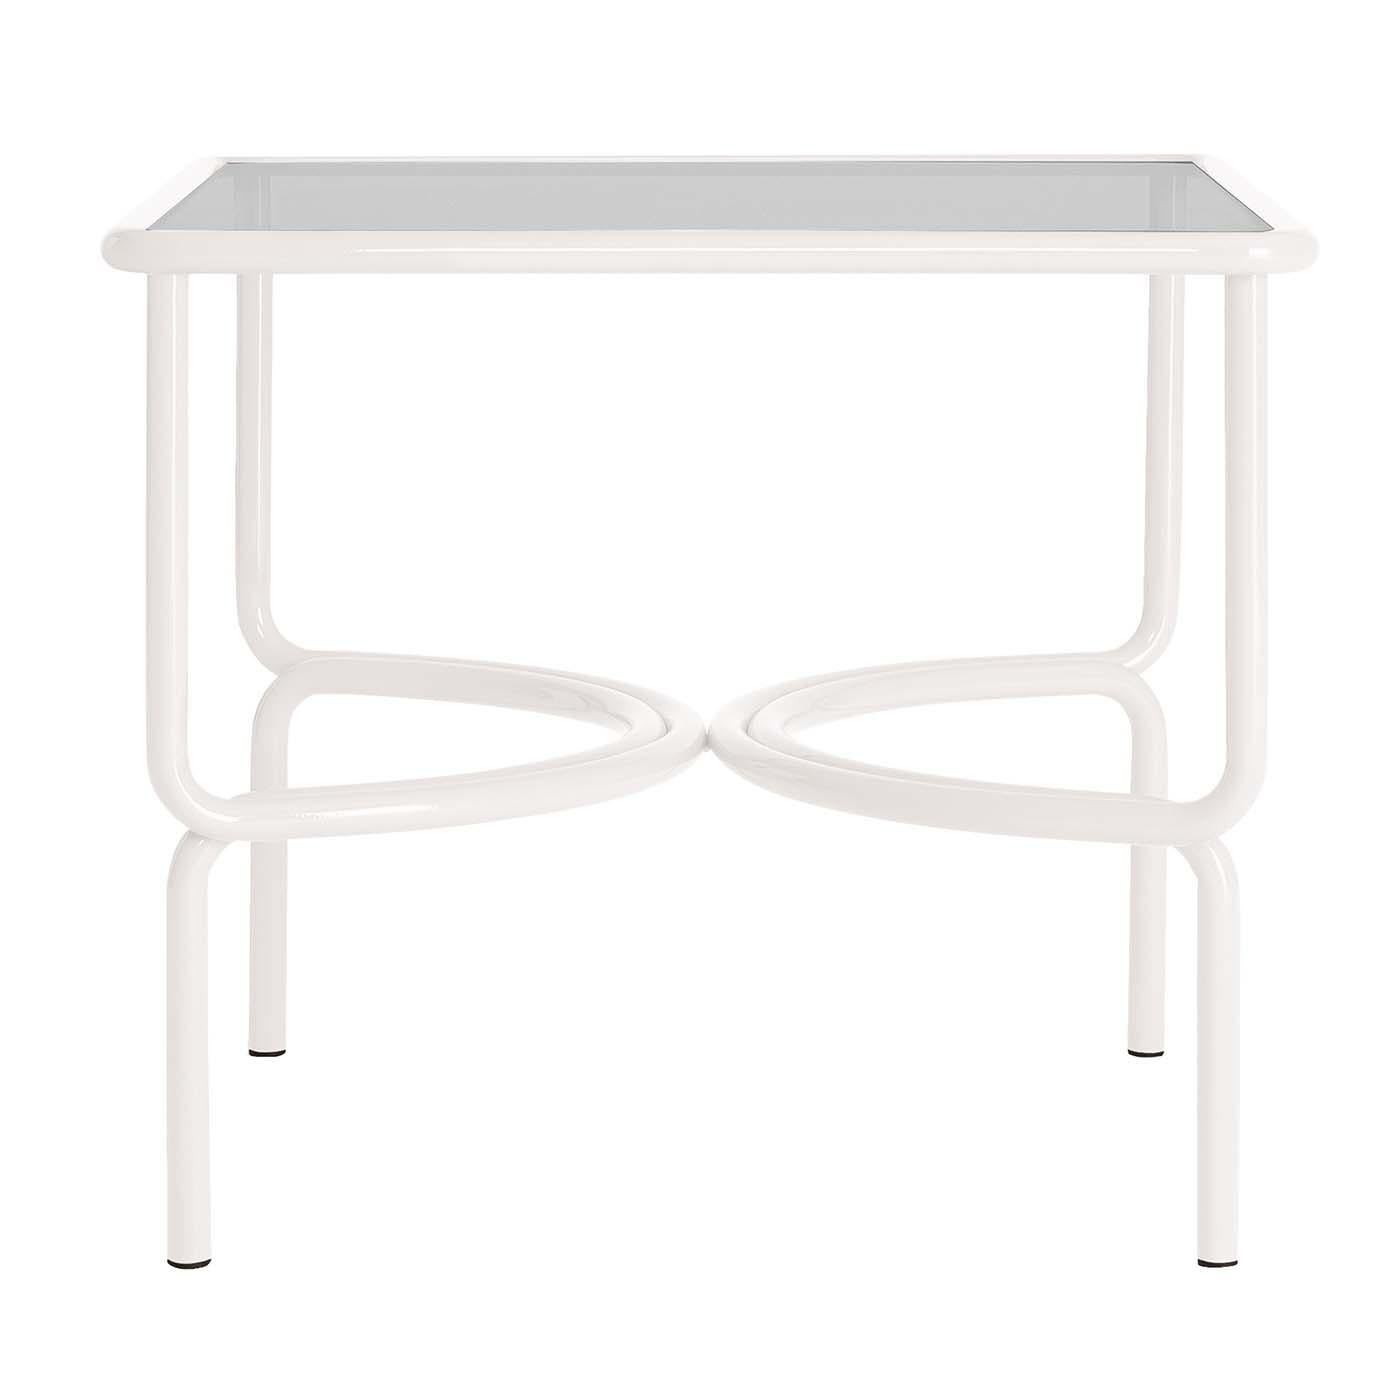 Perfectly integrating with any outdoor setting, this dining table is characterized by a sturdy yet lightweight frame made of white-finished tubular steel. Supporting a square top in extra-light tempered glass, the legs curve inwards at mid-height to